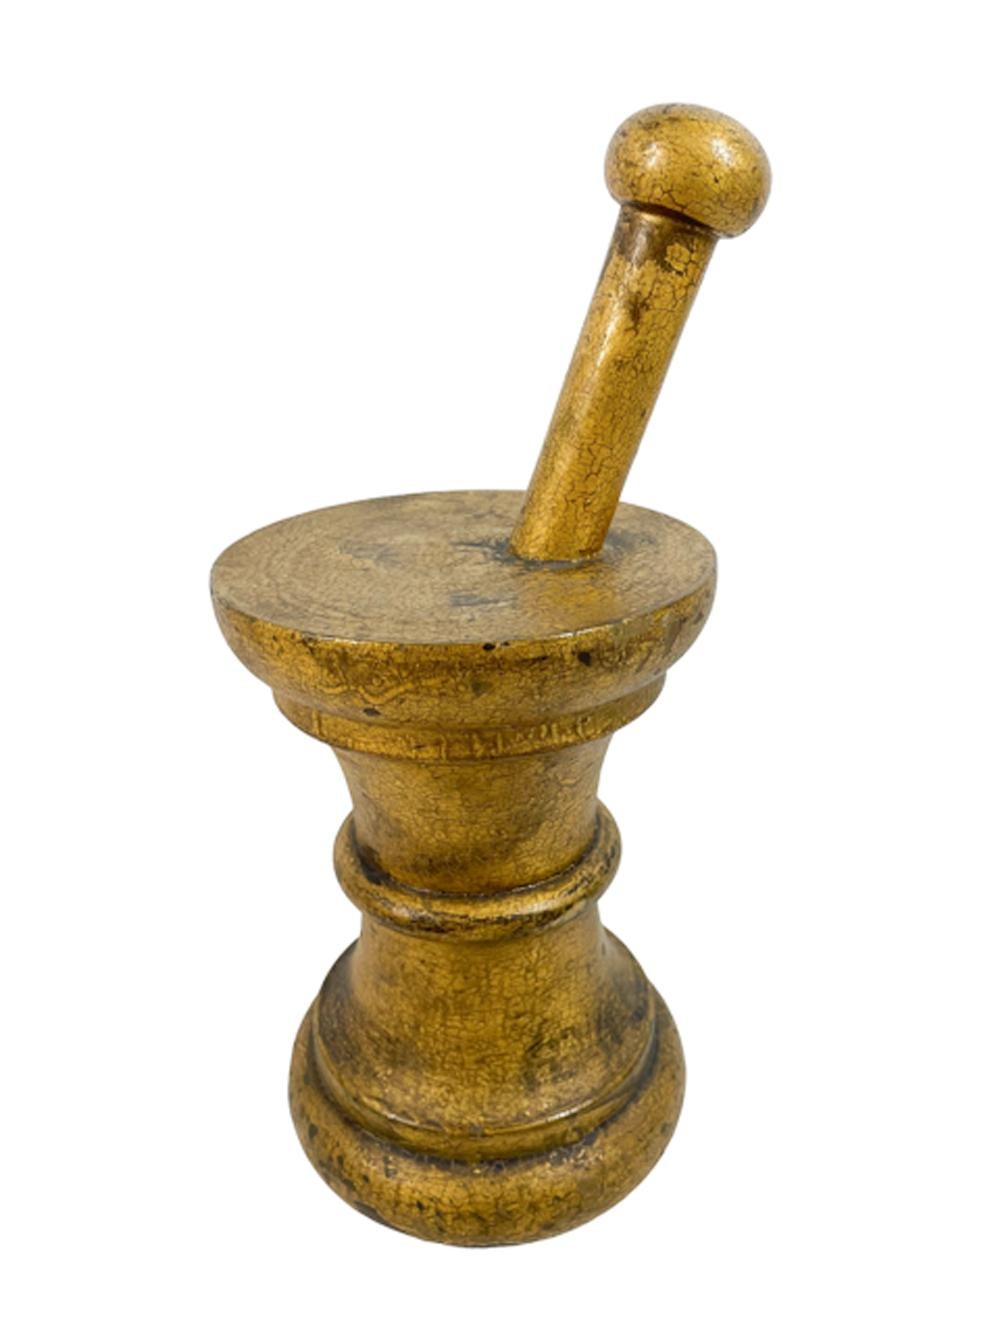 American 19th Century Apothecary Mortar & Pestle Countertop Trade Sign or Sale Stimulator For Sale